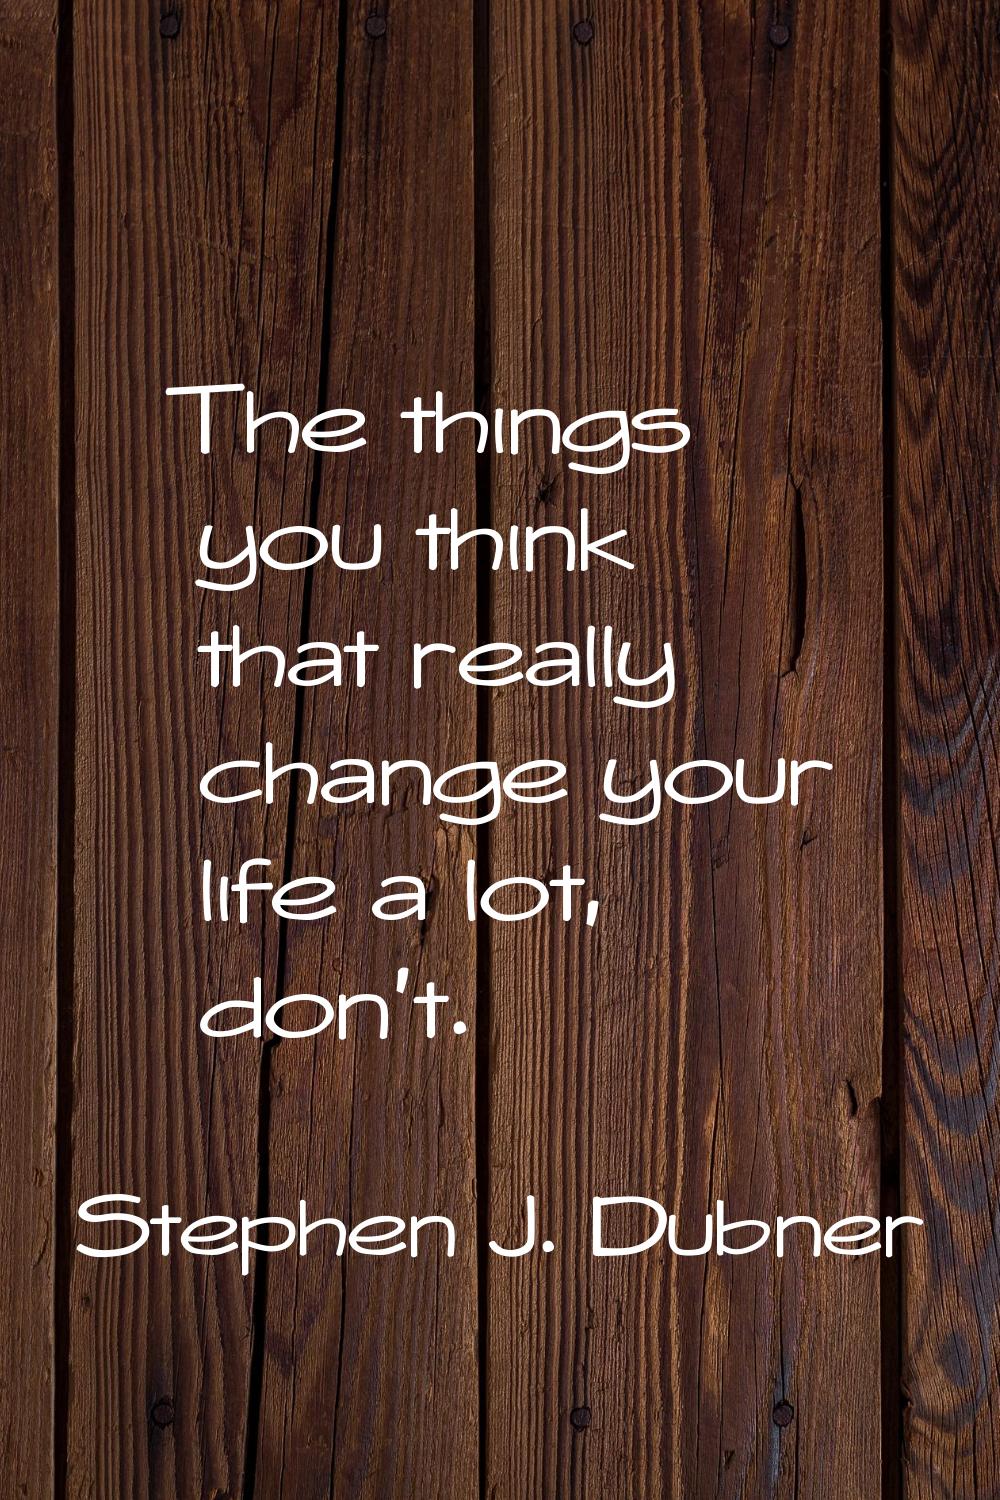 The things you think that really change your life a lot, don't.